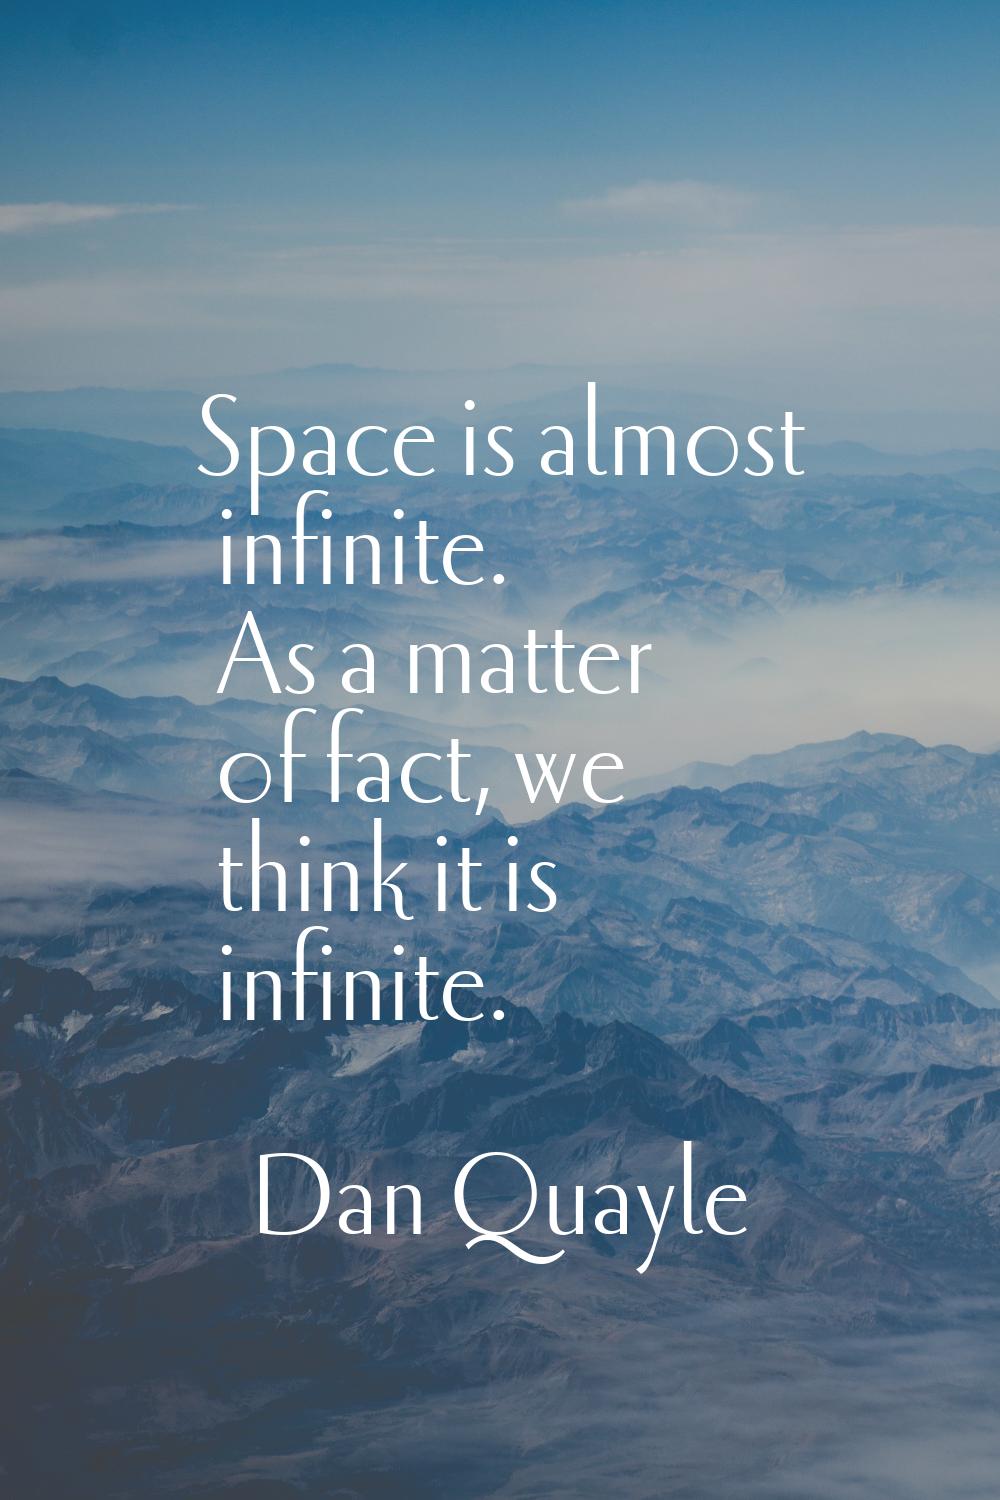 Space is almost infinite. As a matter of fact, we think it is infinite.